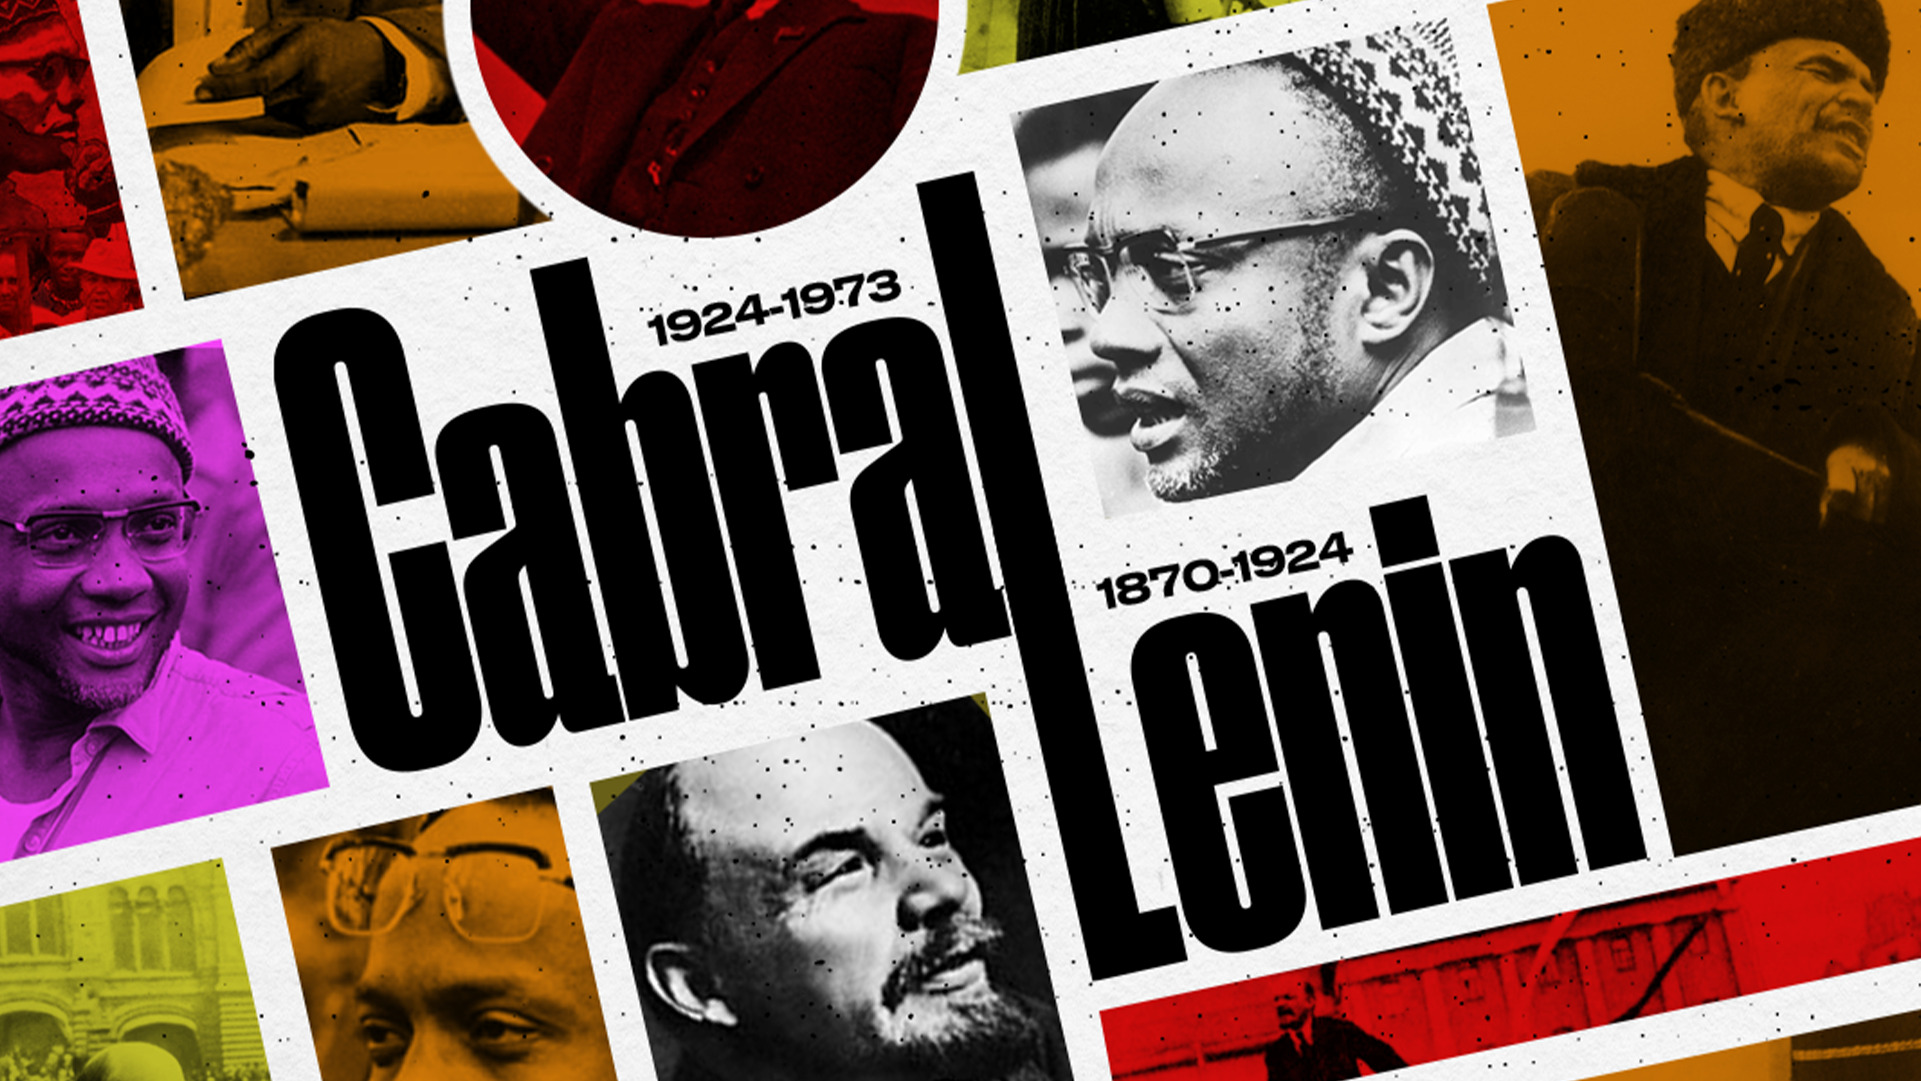 A grid of photos that reads CABRAL LENIN in the middle, surrounded by photos of the two men.